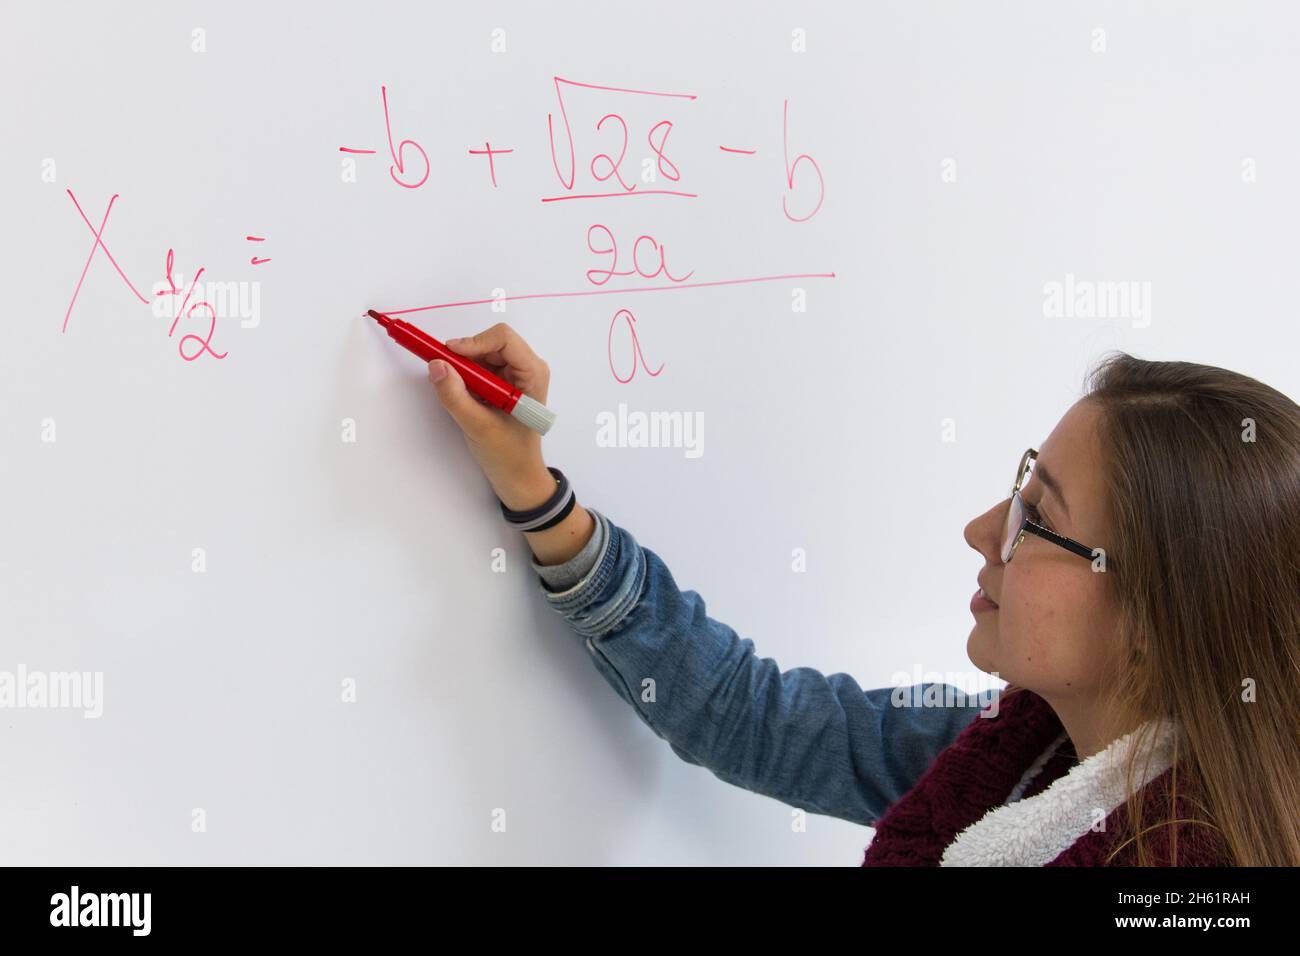 Bright student solving math equation. Blonde young girl writing with red pen on white board. Intelligent woman concept, teacher explaining problem Stock Photo